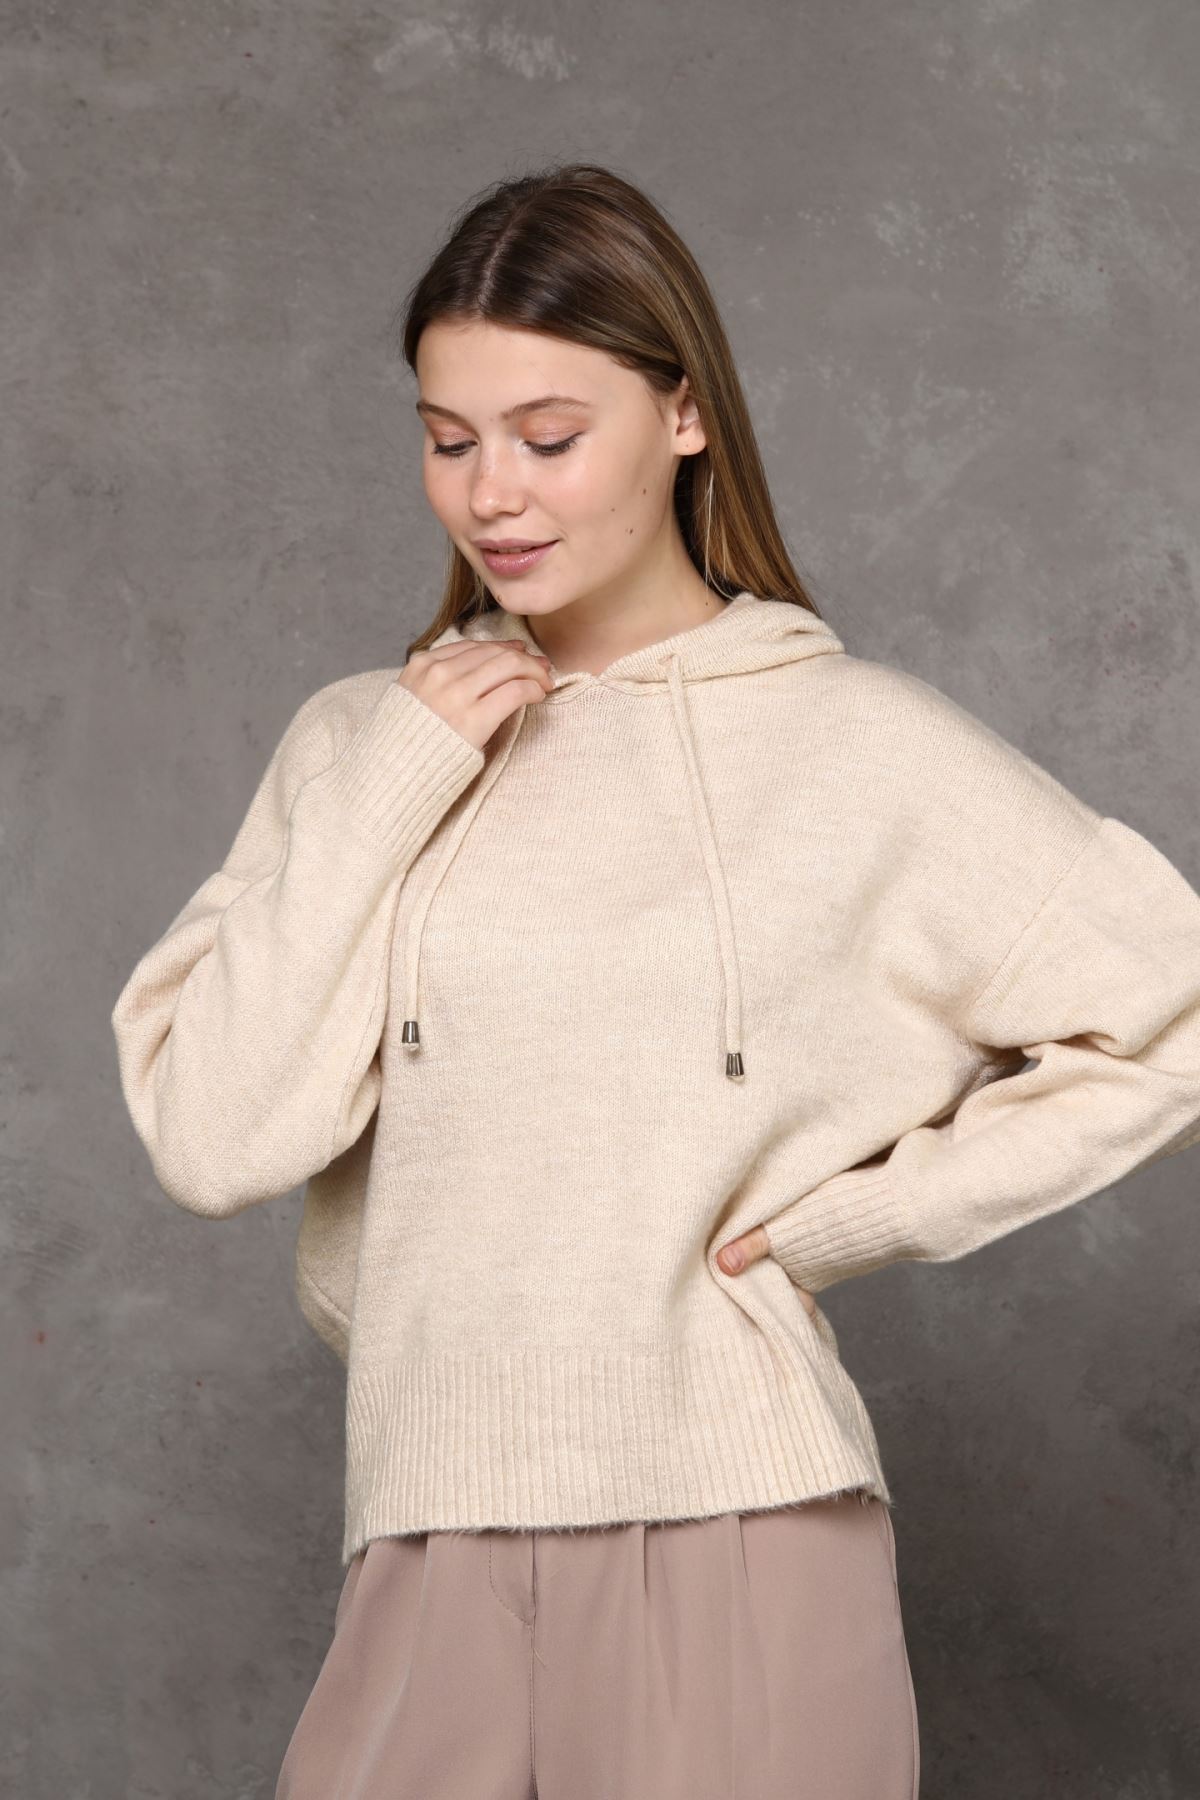 Hooded Sweater Women's Pullover